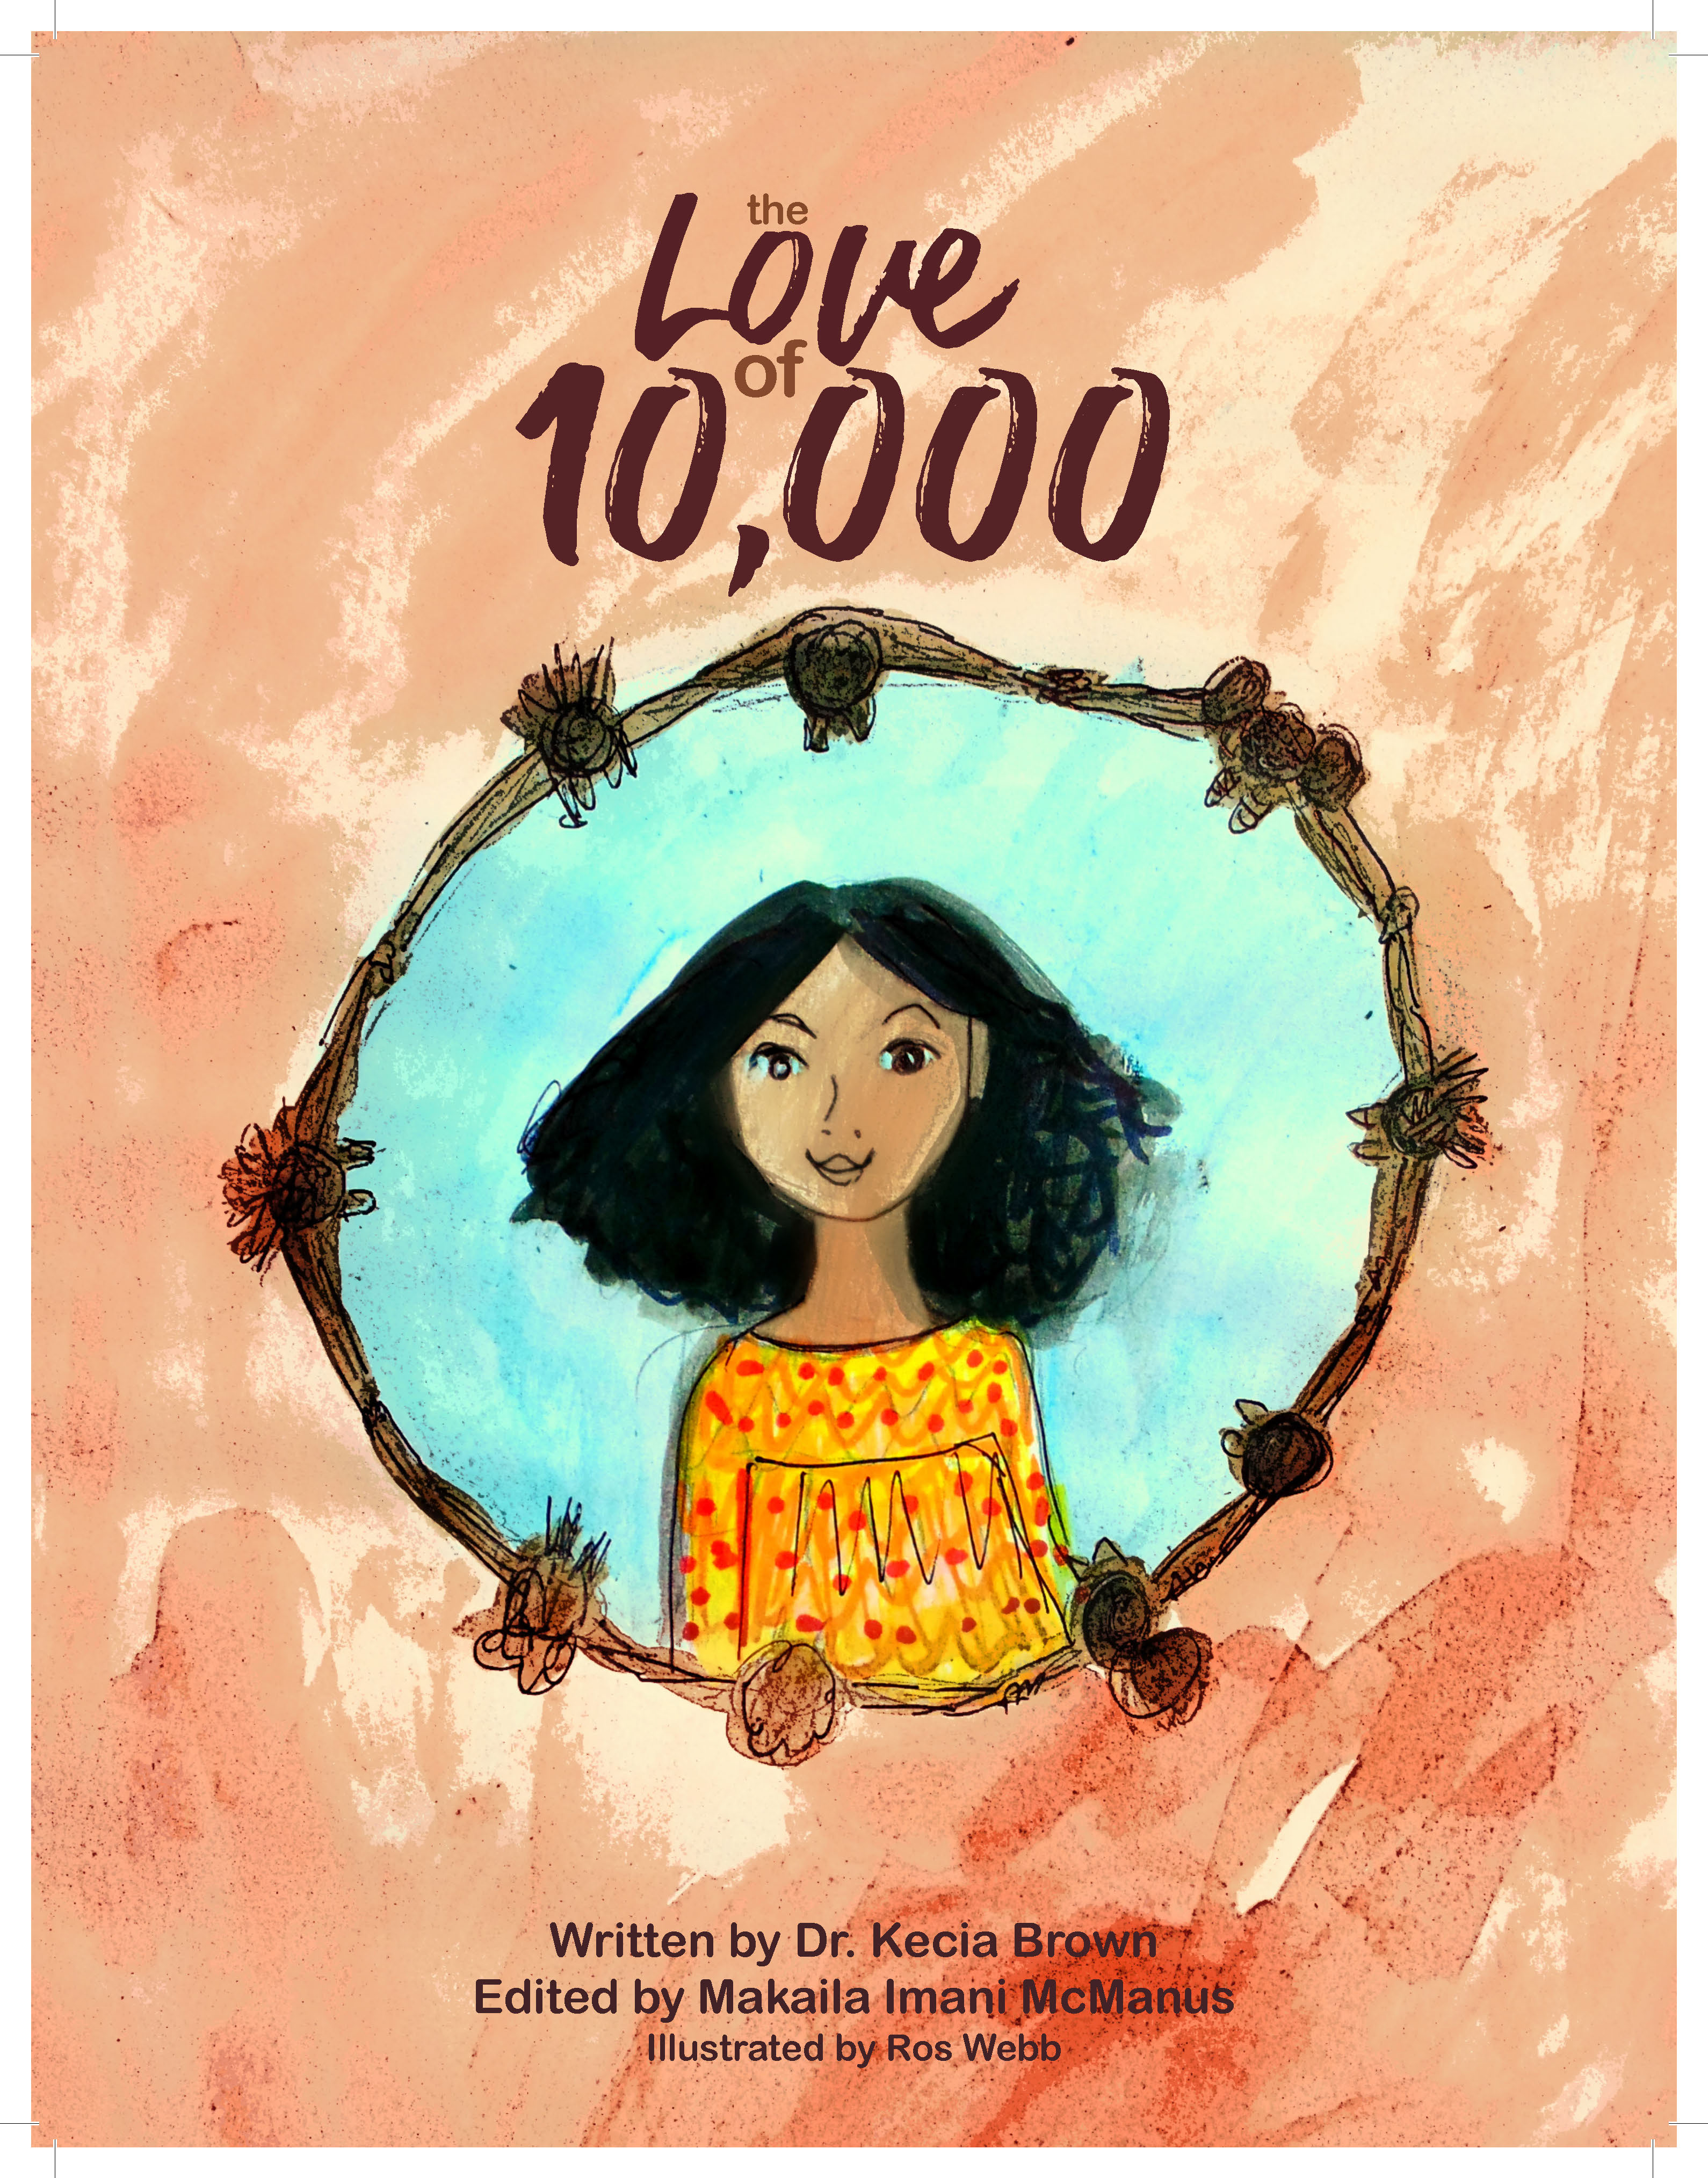 PRESS RELEASE: The Love of 10,000